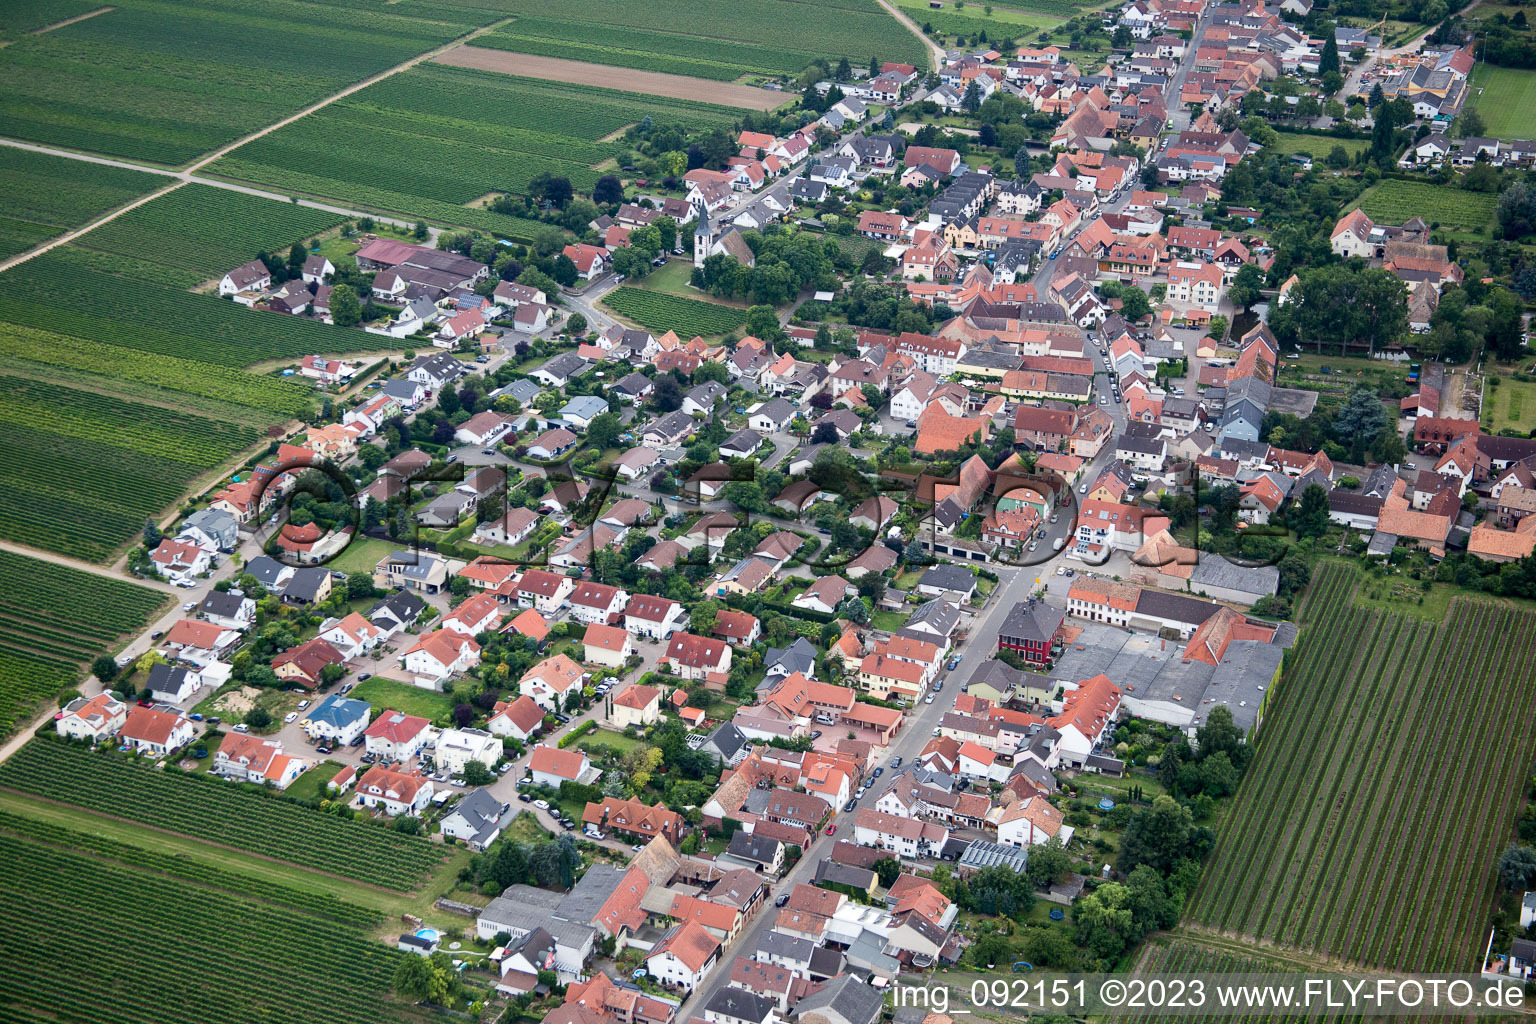 Gönnheim in the state Rhineland-Palatinate, Germany from above